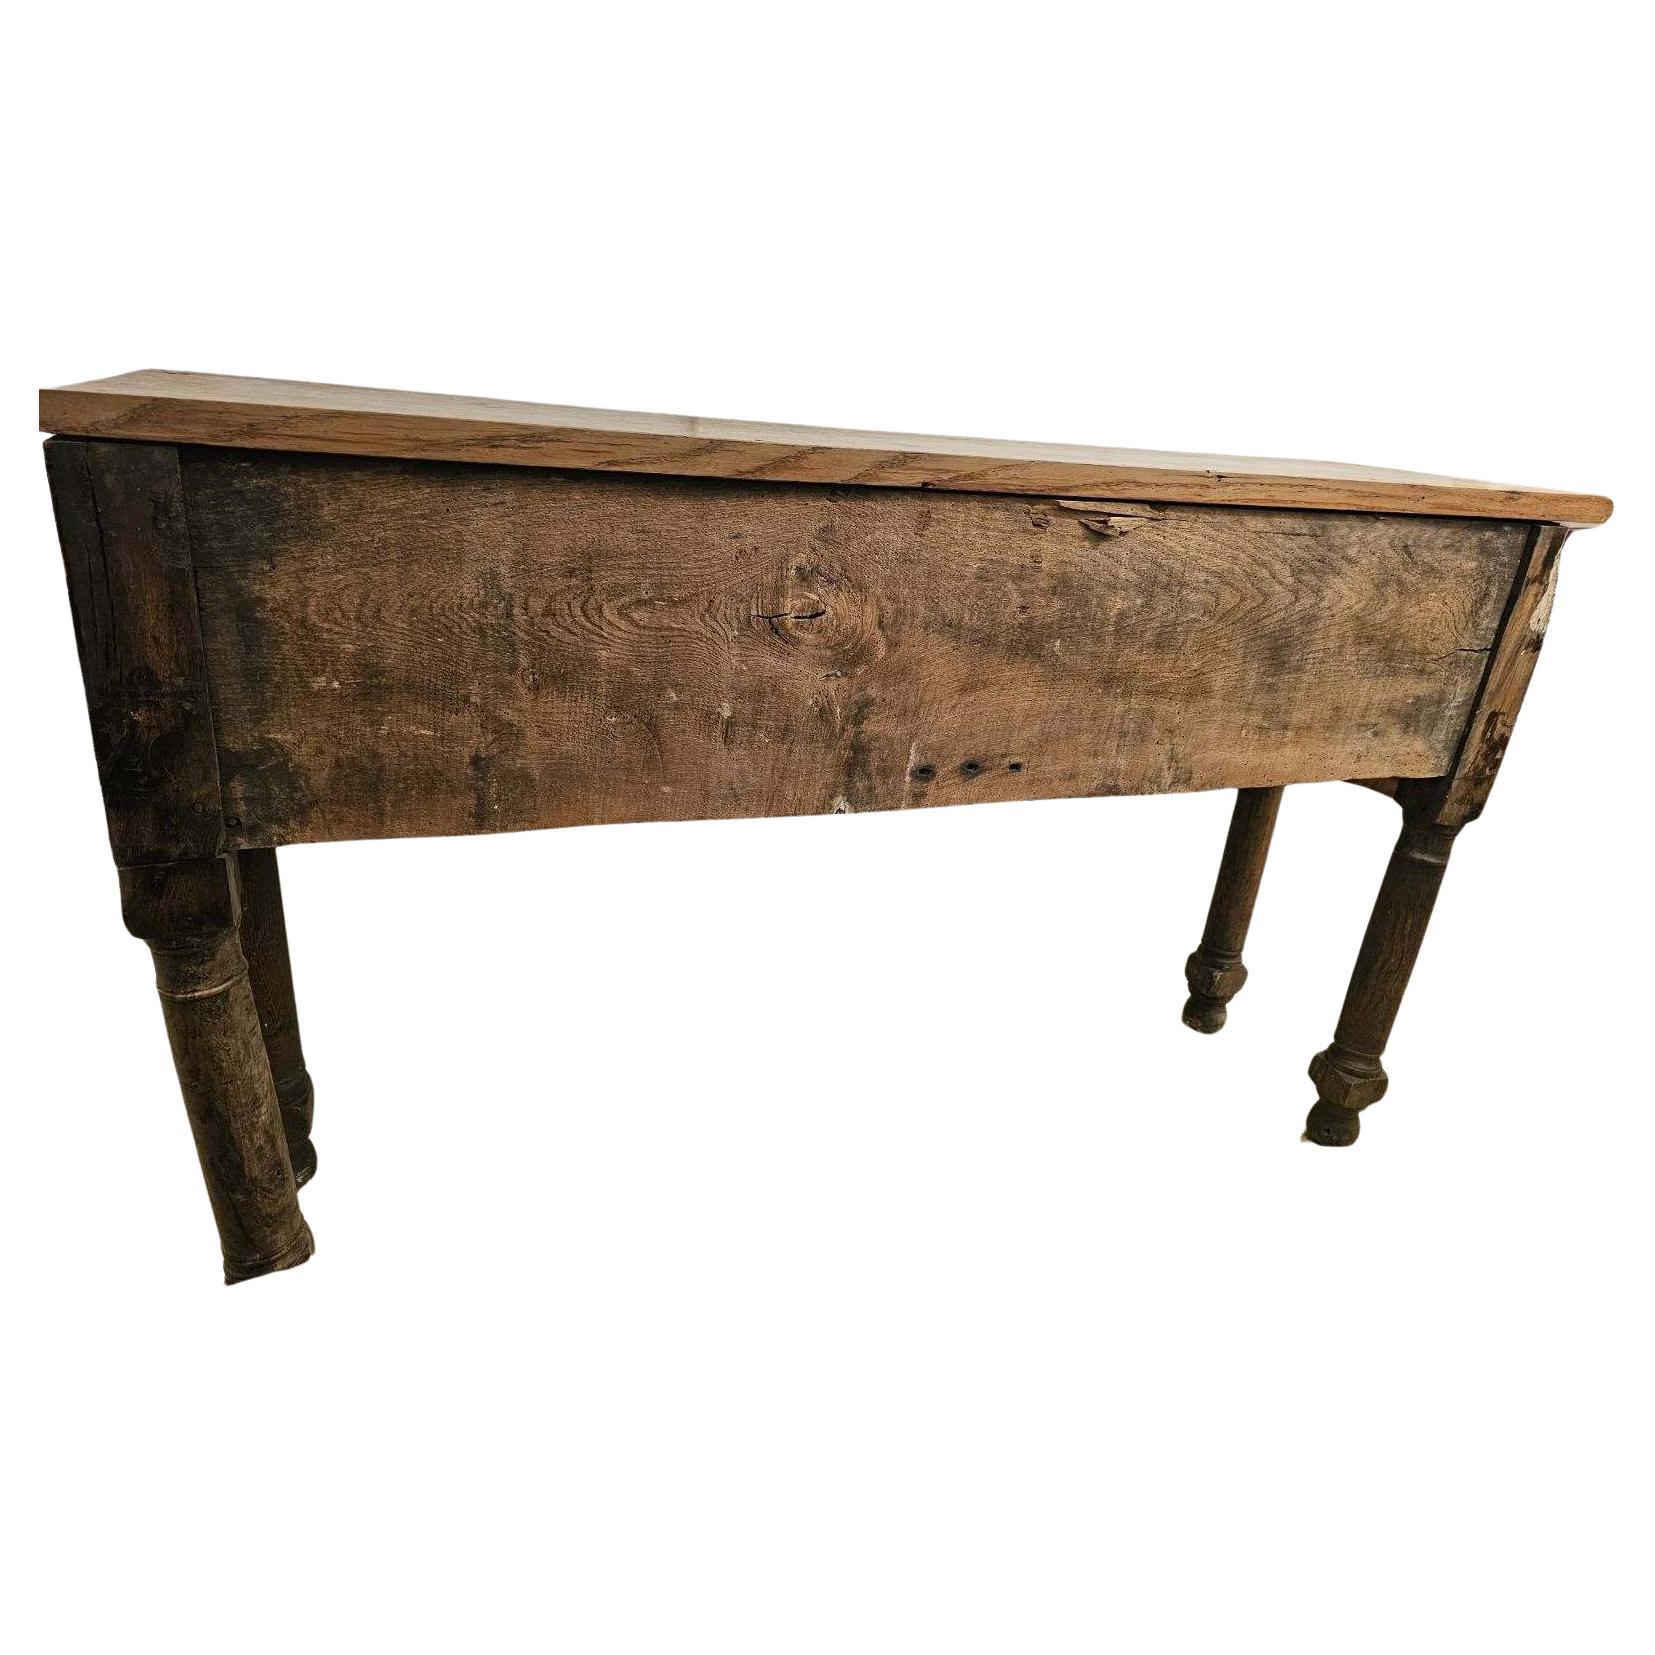 Character rich chunky oak antique console.  Two deep drawers with original iron handles.